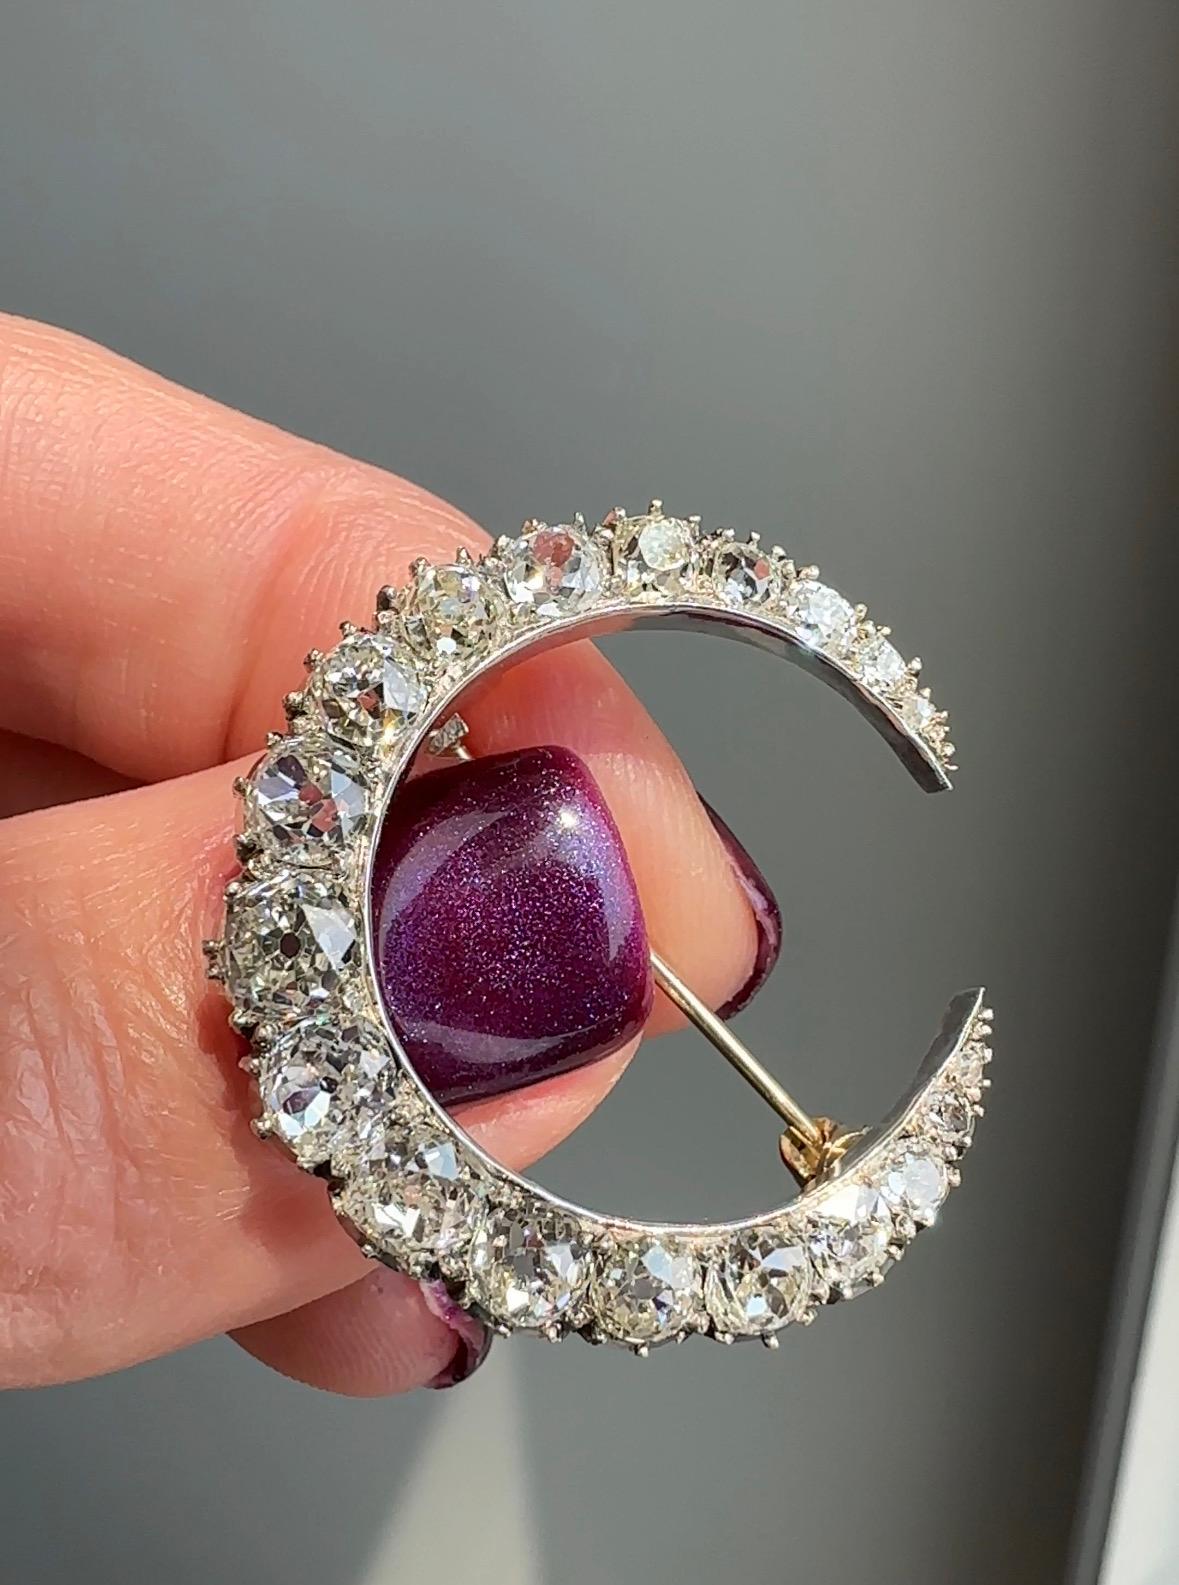 Complete with the original fitted box from R. Stewart in Glasgow, this romantic late 19th century crescent brooch is lined with a graduated course of 4.35 carats in glittering old mine-cut and rose-cut diamonds, masterfully hand fabricated in silver